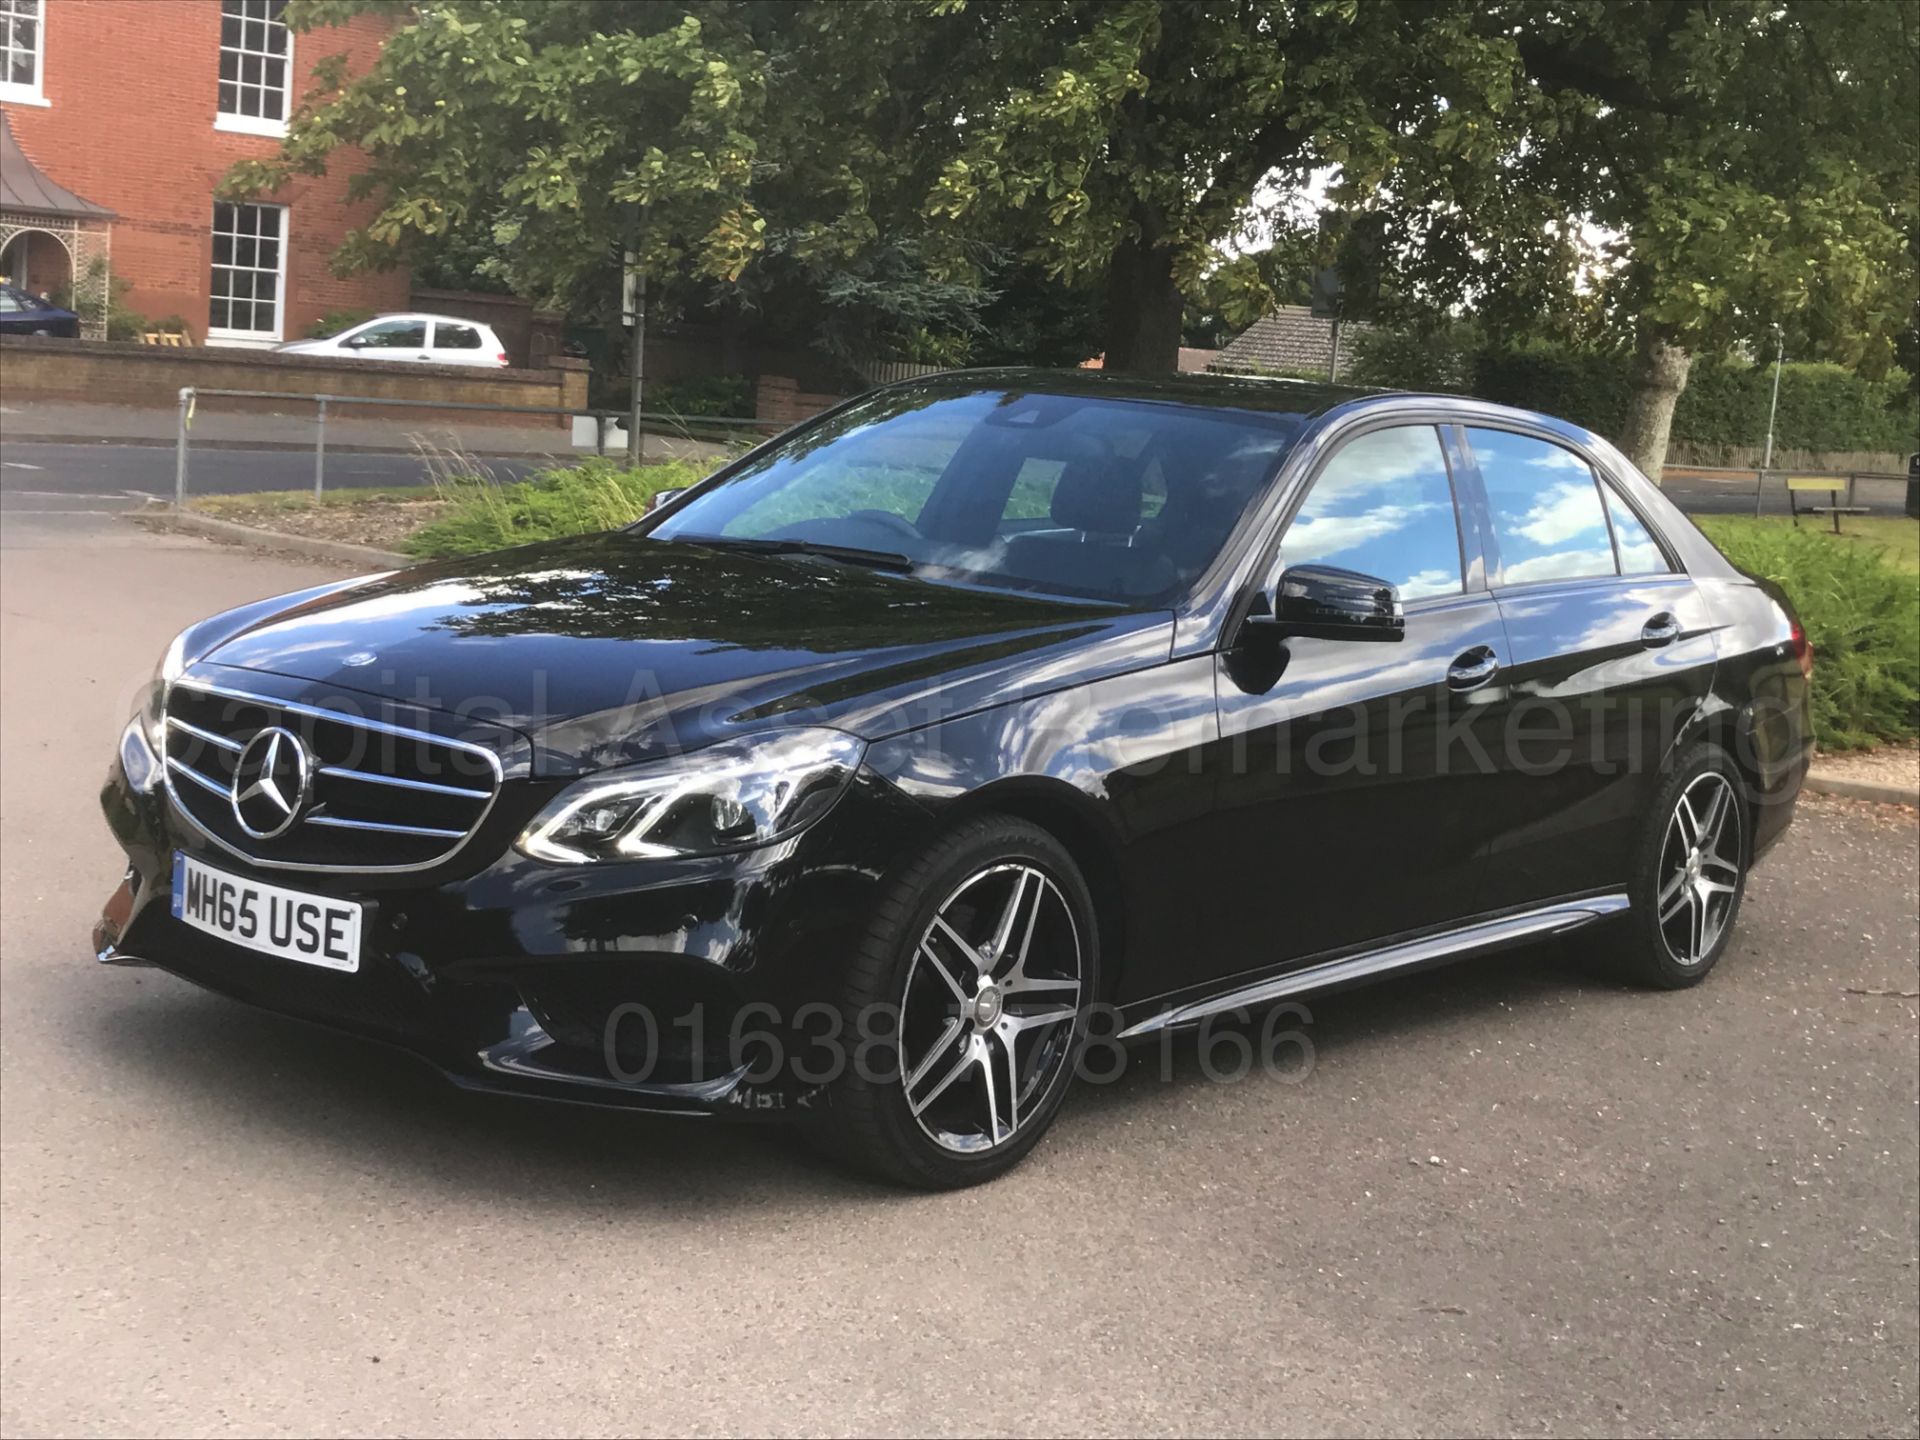 MERCEDES-BENZ E220D *AMG - NIGHT EDITION* SALOON (2016) '7G AUTO - LEATHER - SAT NAV' *LOW MILES*